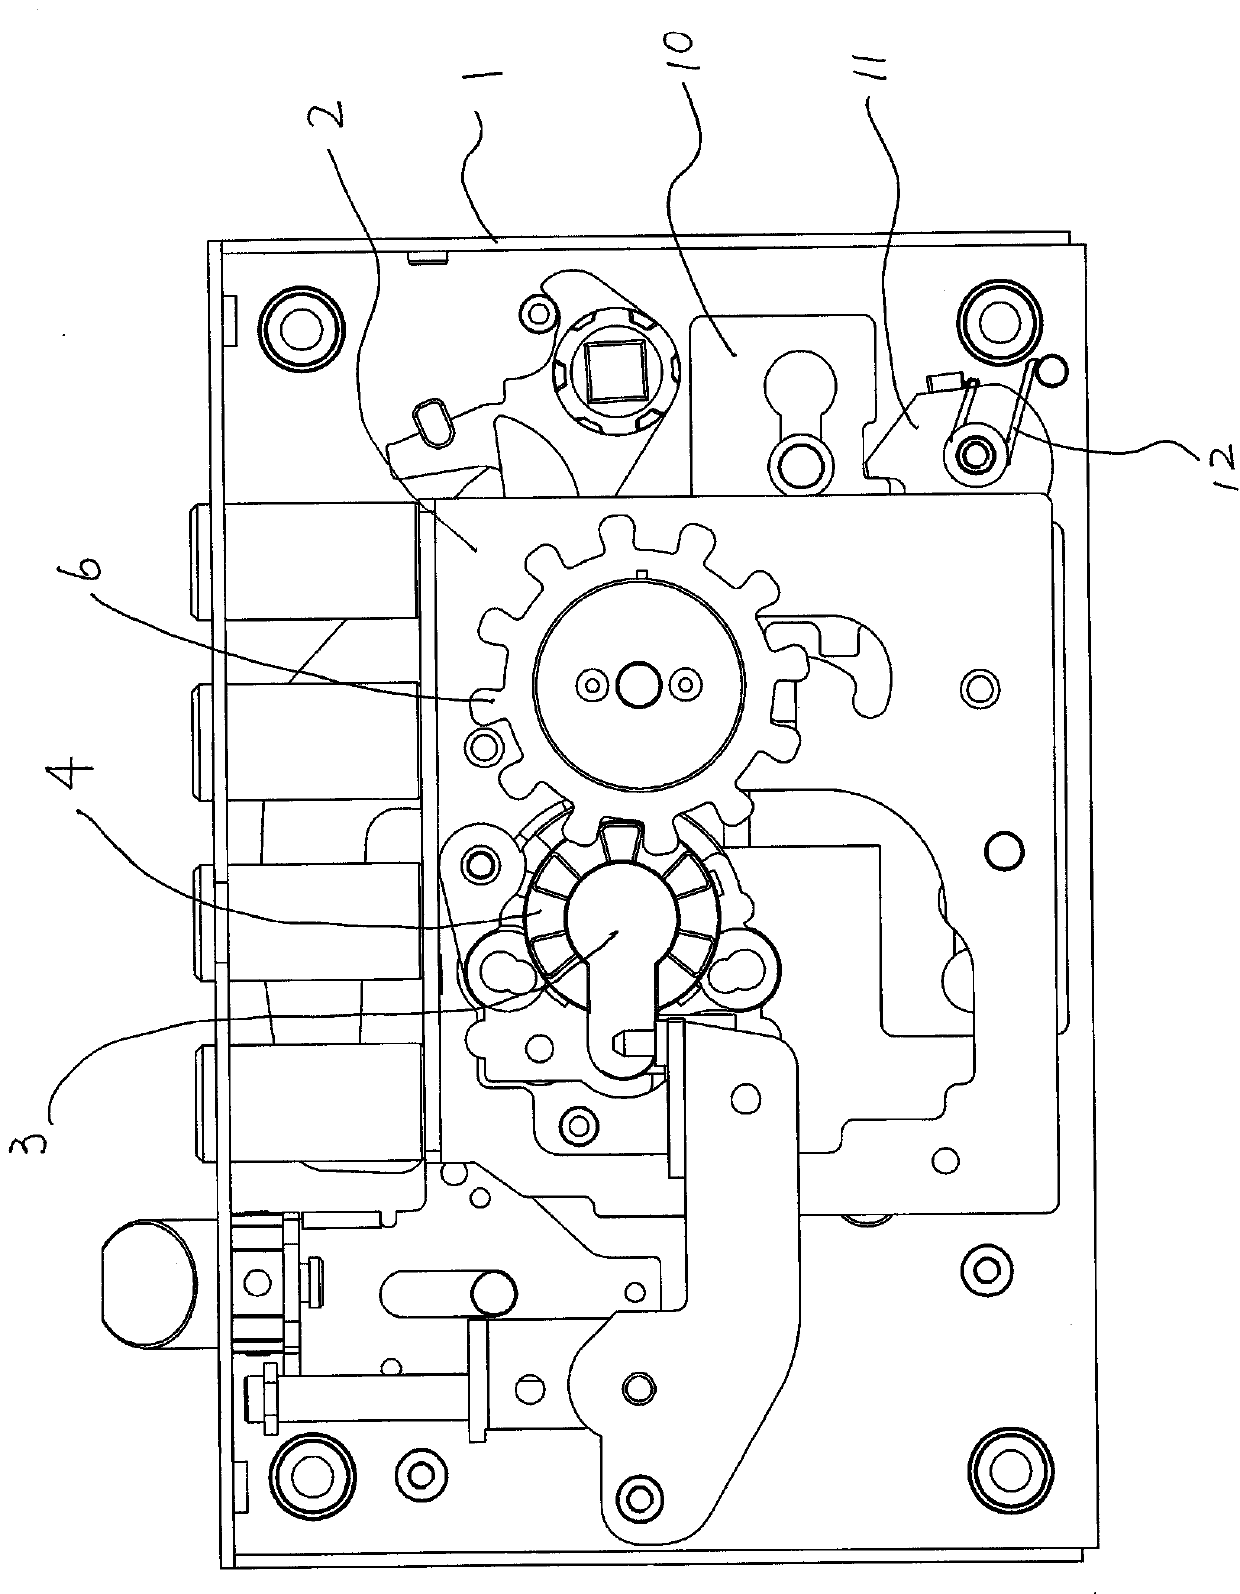 Gear lock mechanism with anti-theft device